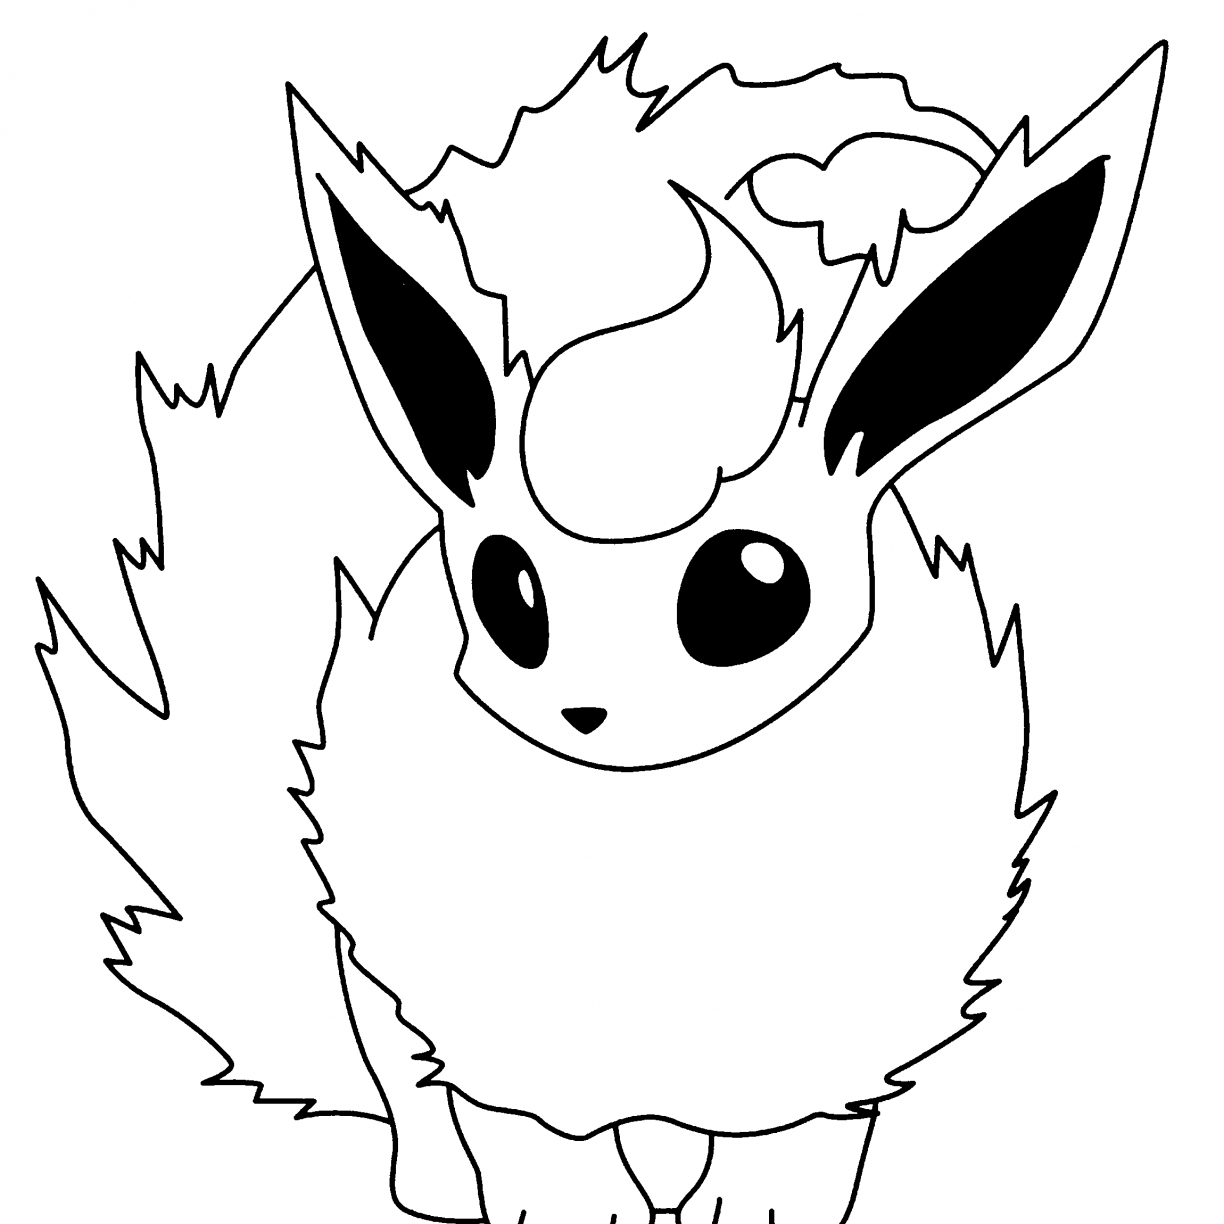 Water Type Pokemon Coloring Pages at GetDrawings | Free ...